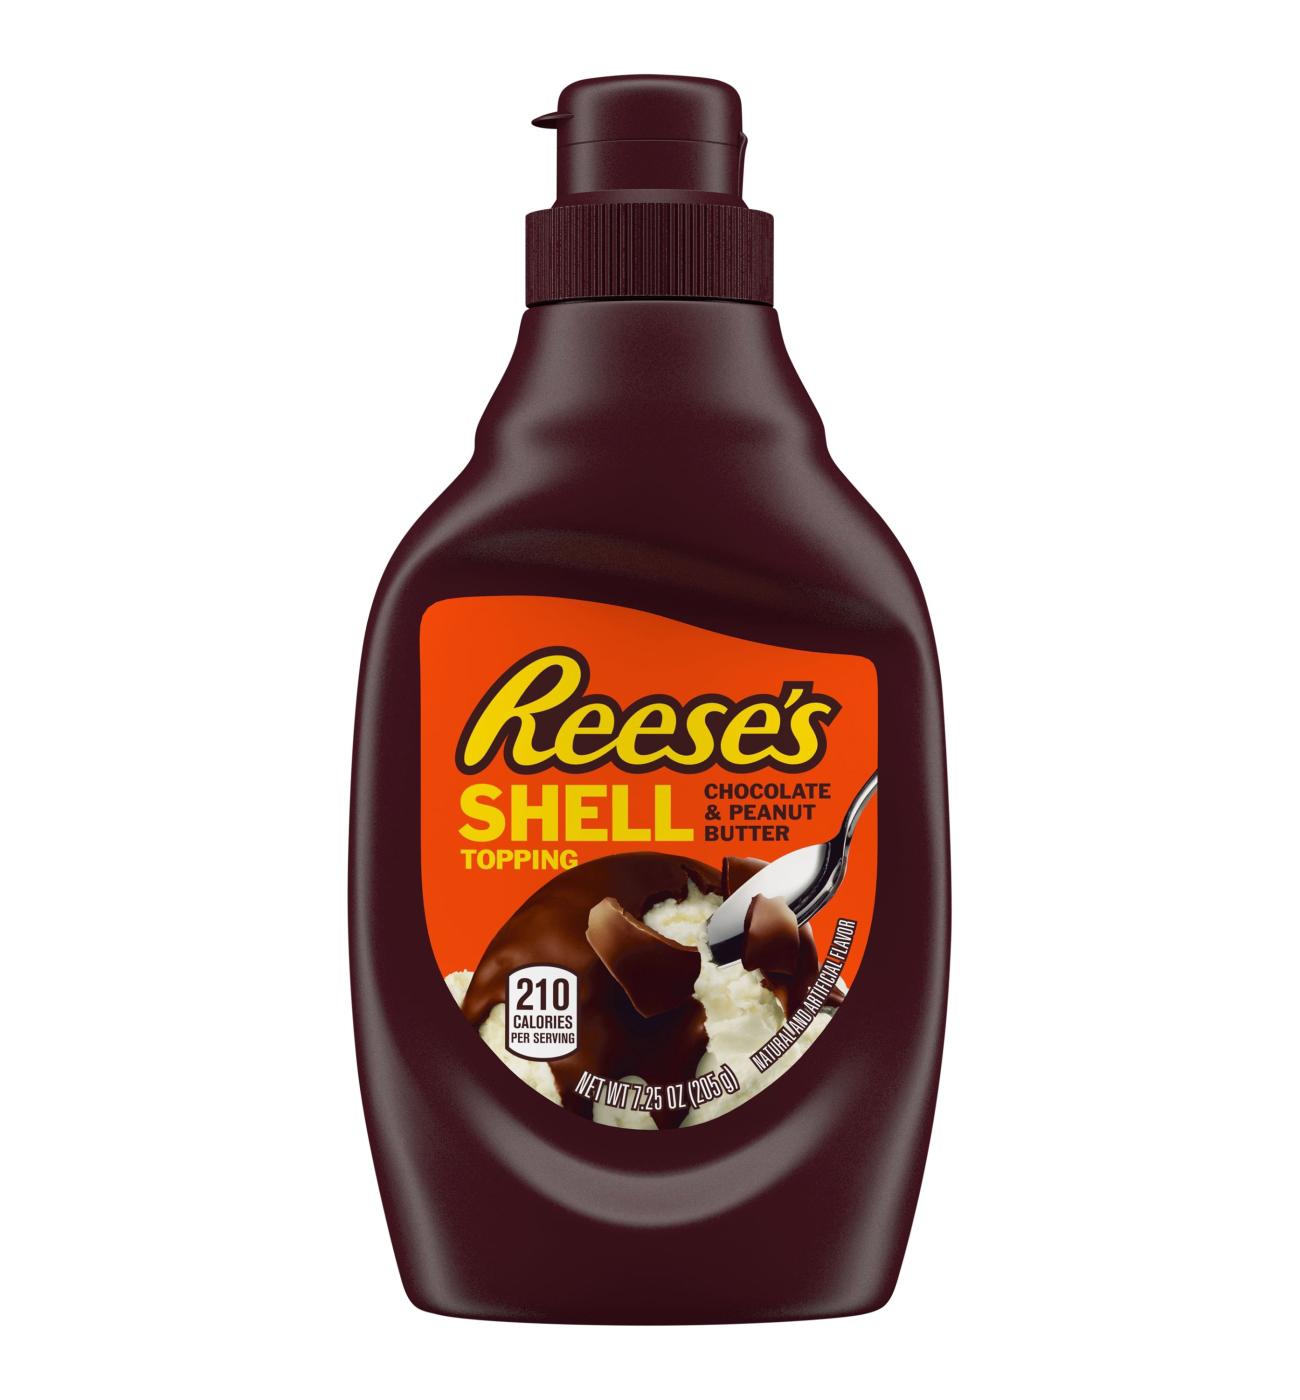 Reese's Chocolate And Peanut Butter Shell Topping; image 1 of 3